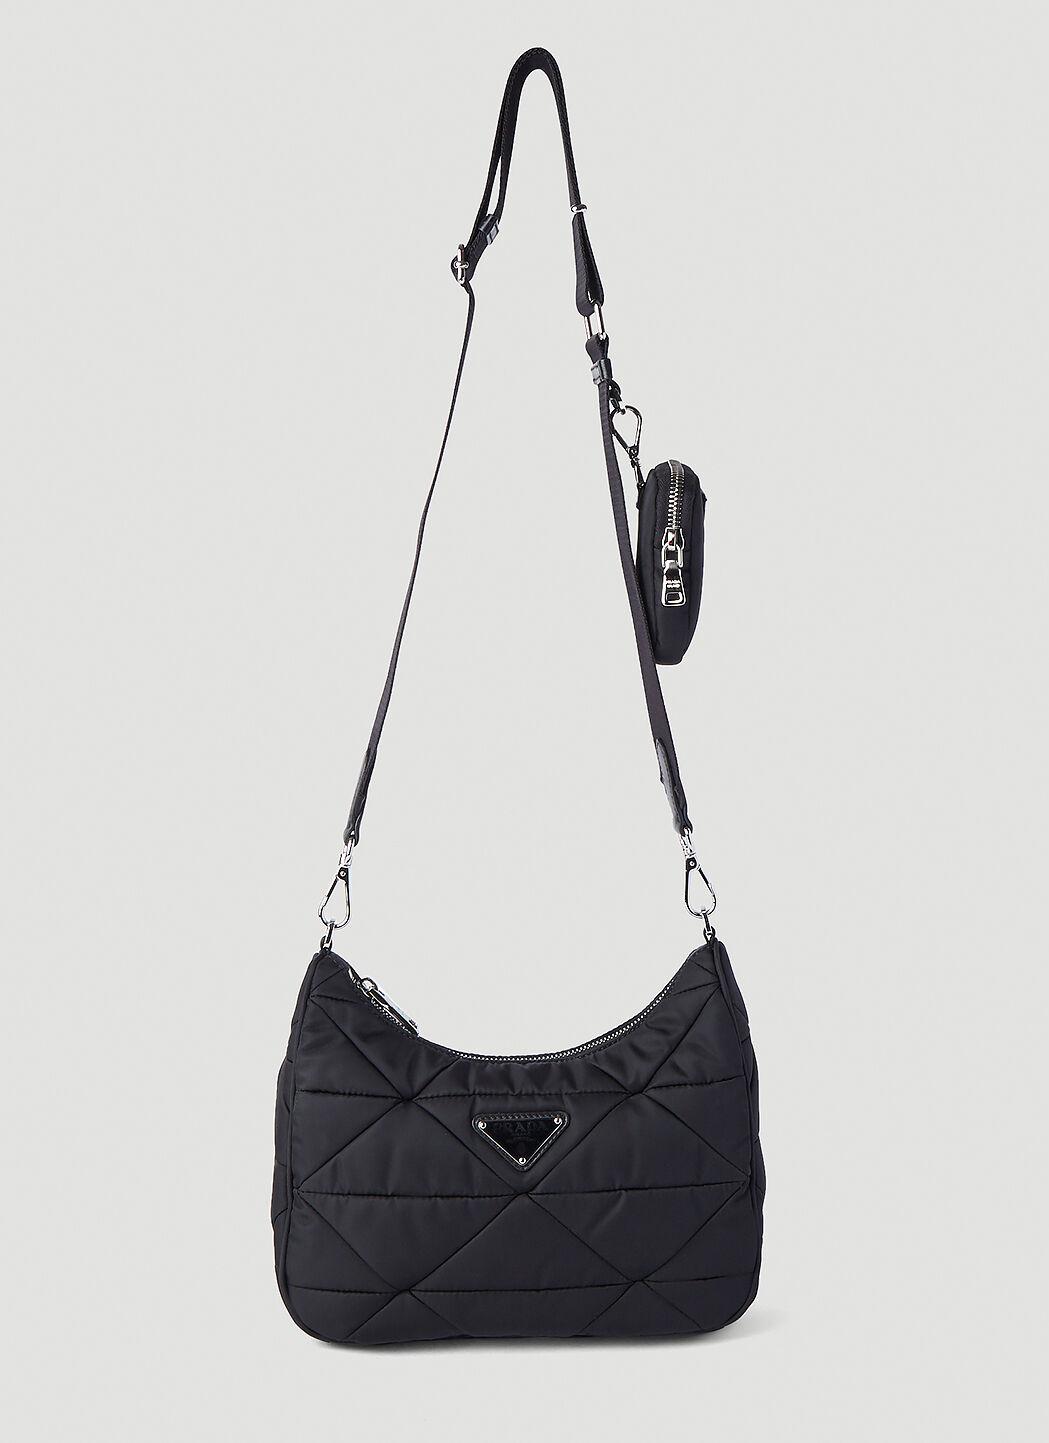 Prada Re-edition Quilted Shoulder Bag in Black | Lyst Canada